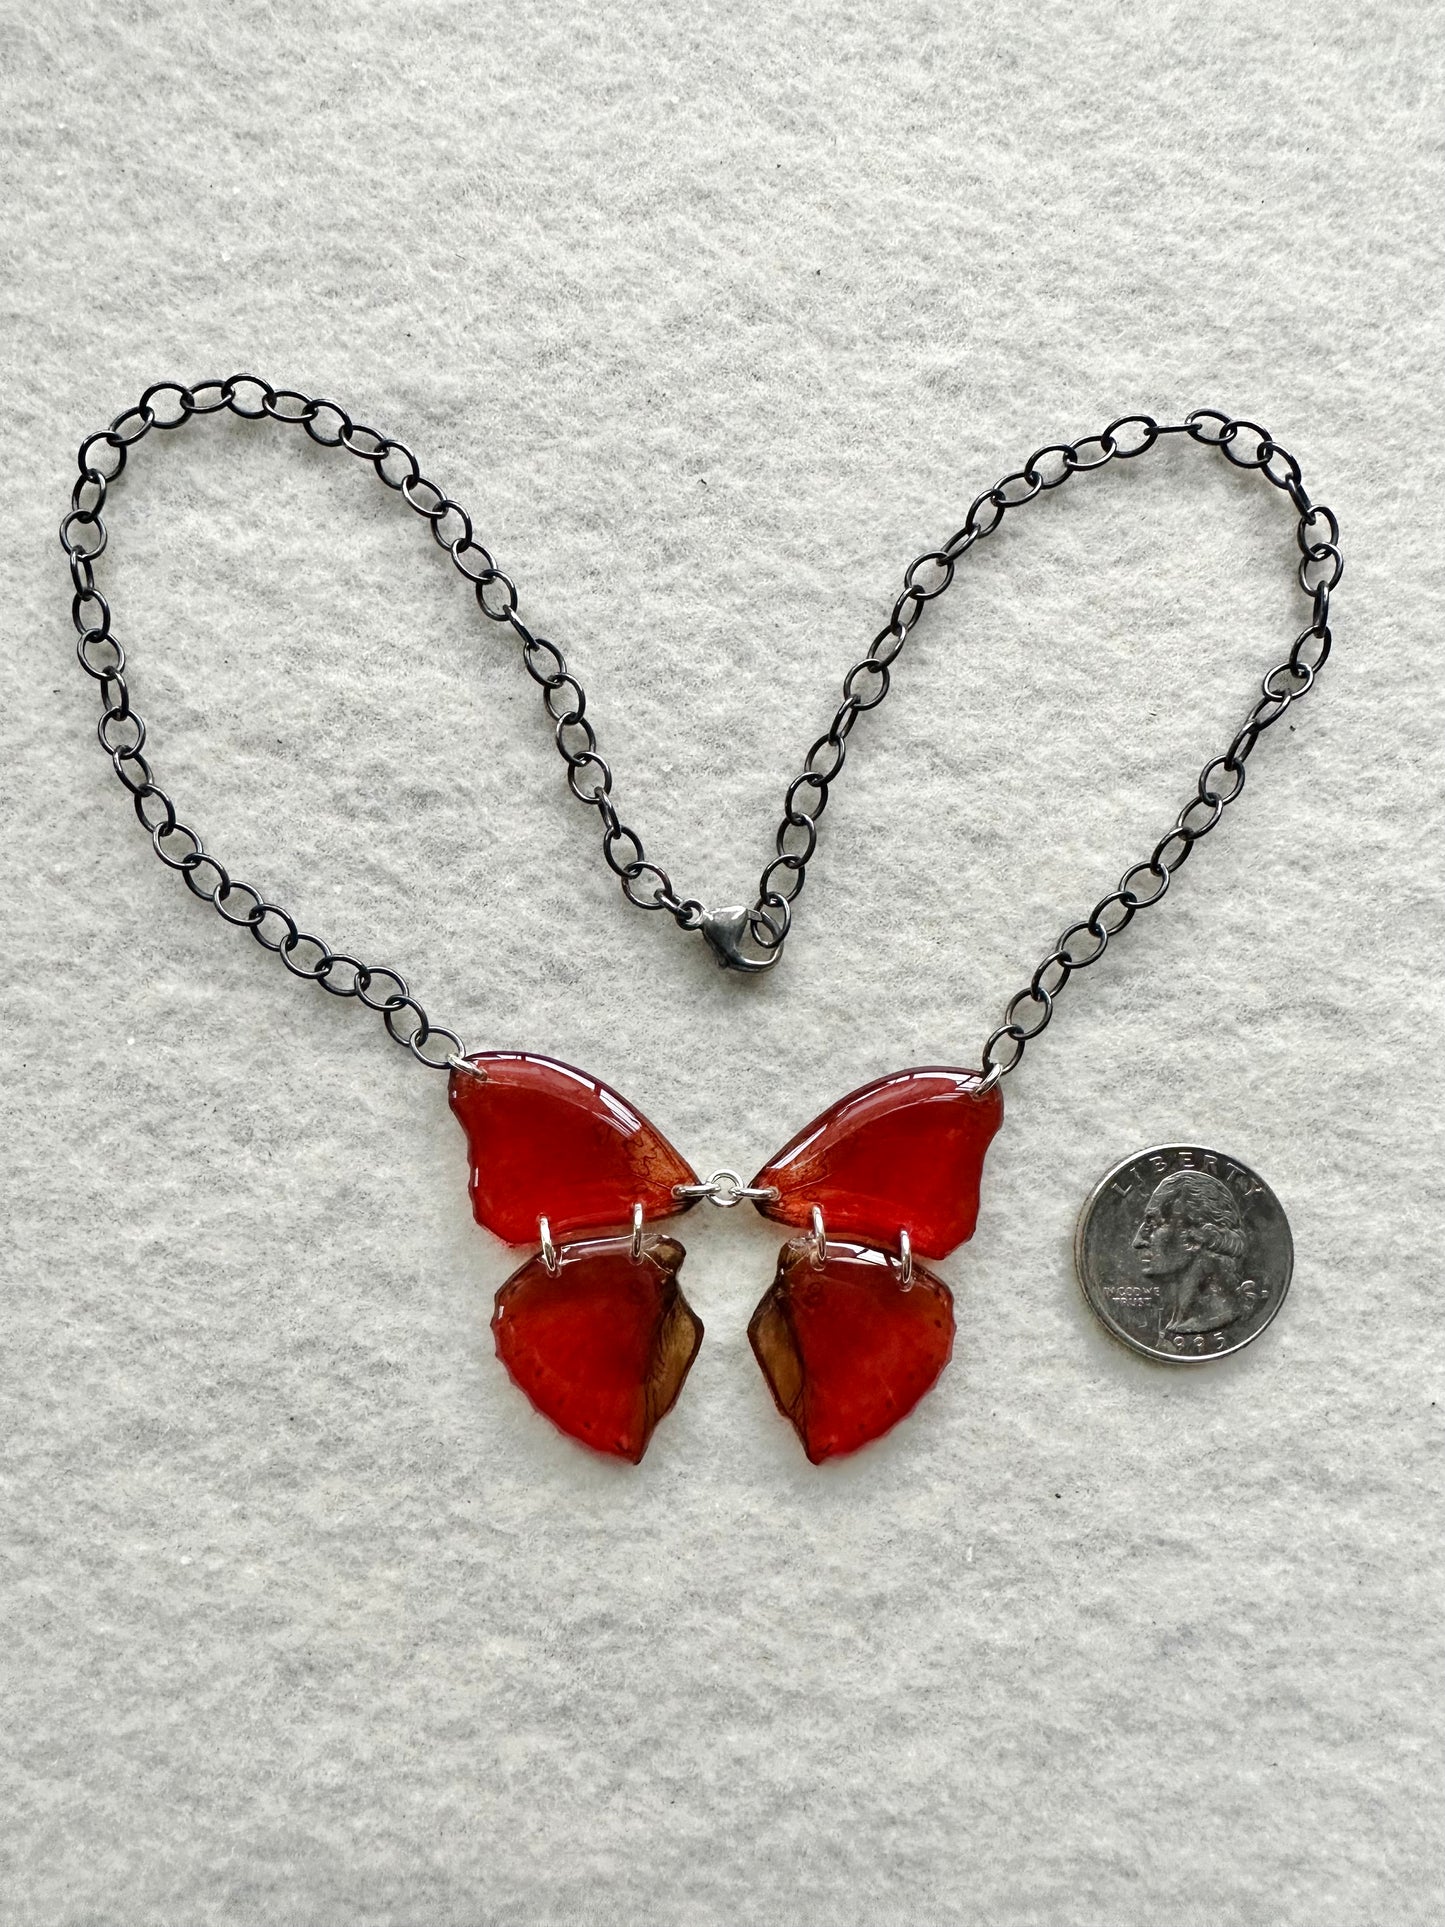 Real Whole Blood Red Glider Butterfly Wing Necklace